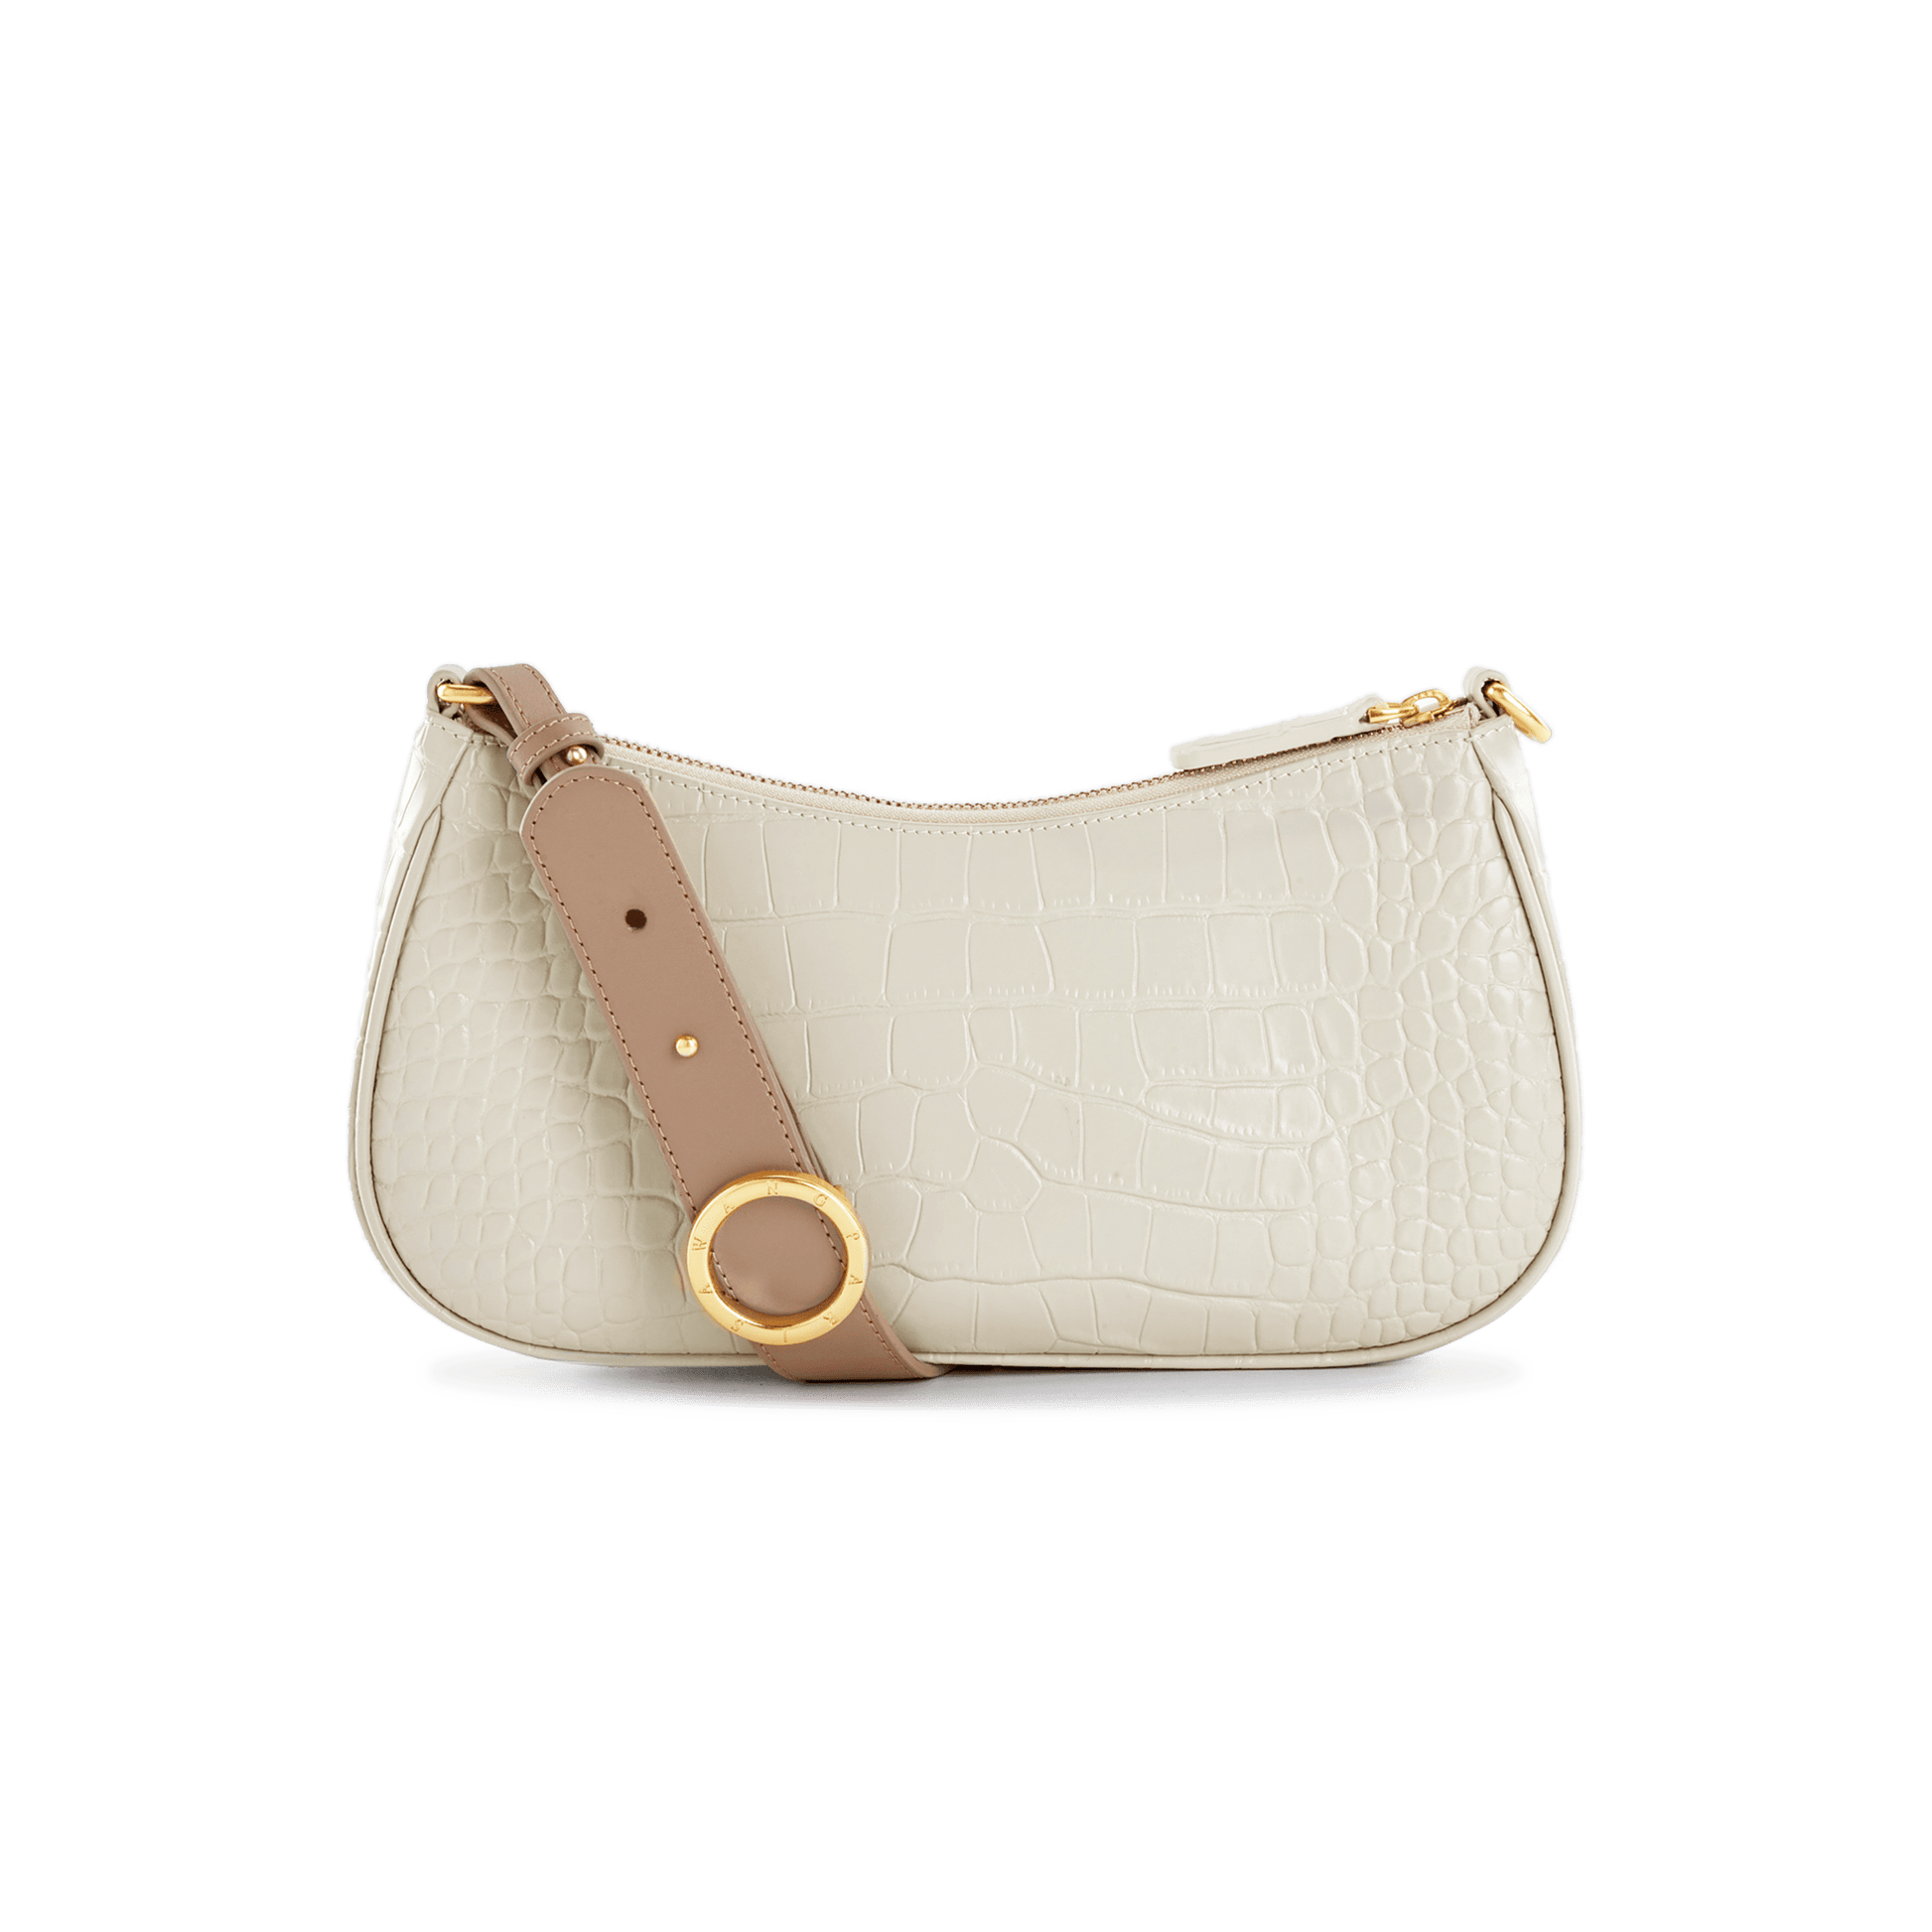 27 Best French Handbag Brands For A Classy Woman - Dreams in Paris